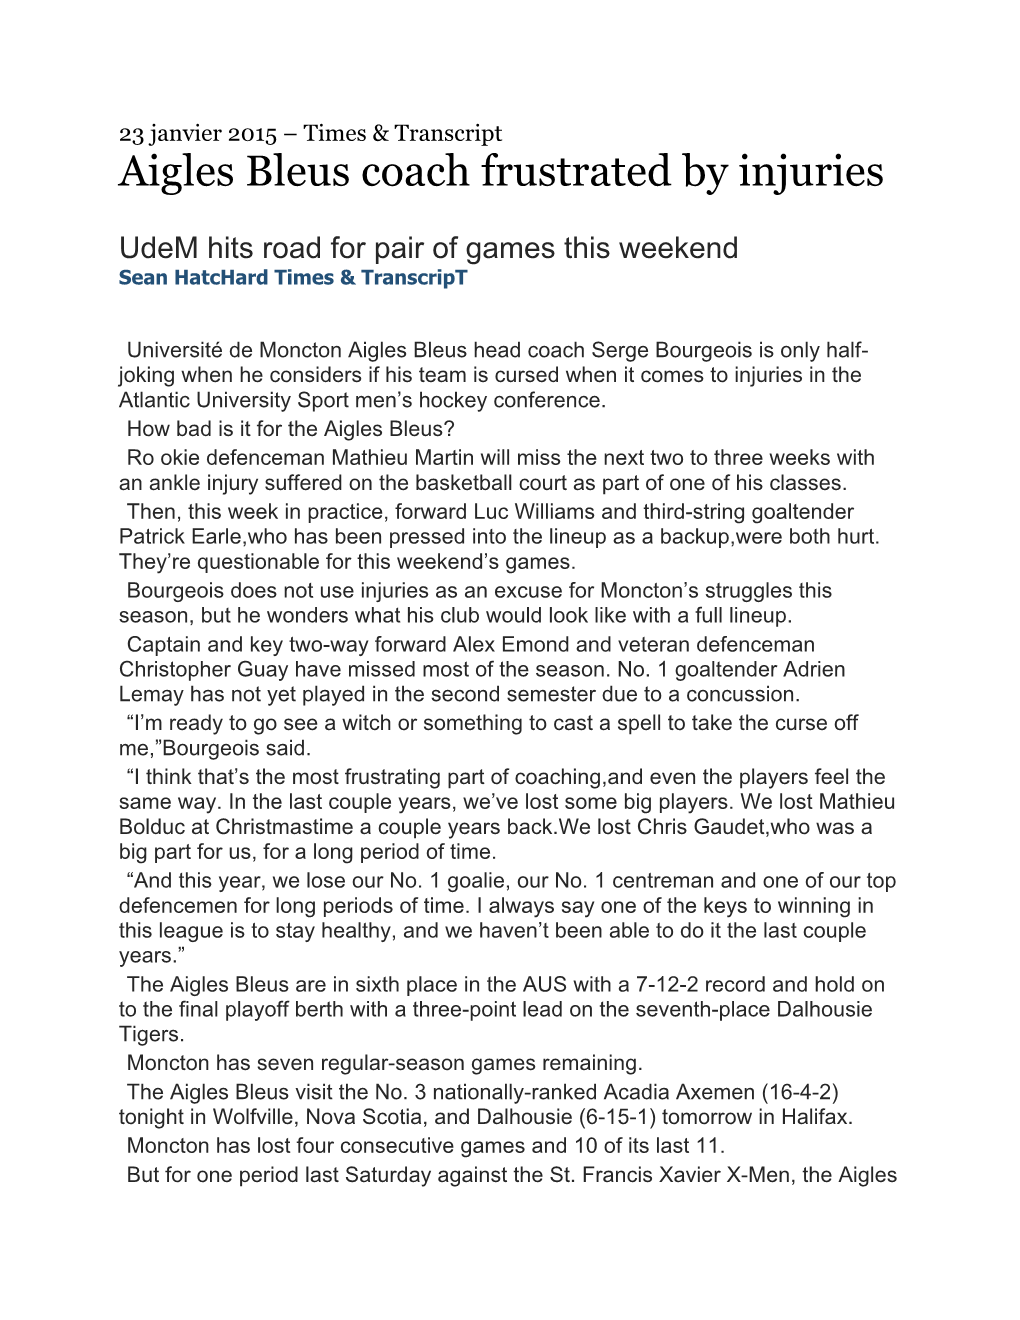 Aigles Bleus Coach Frustrated by Injuries